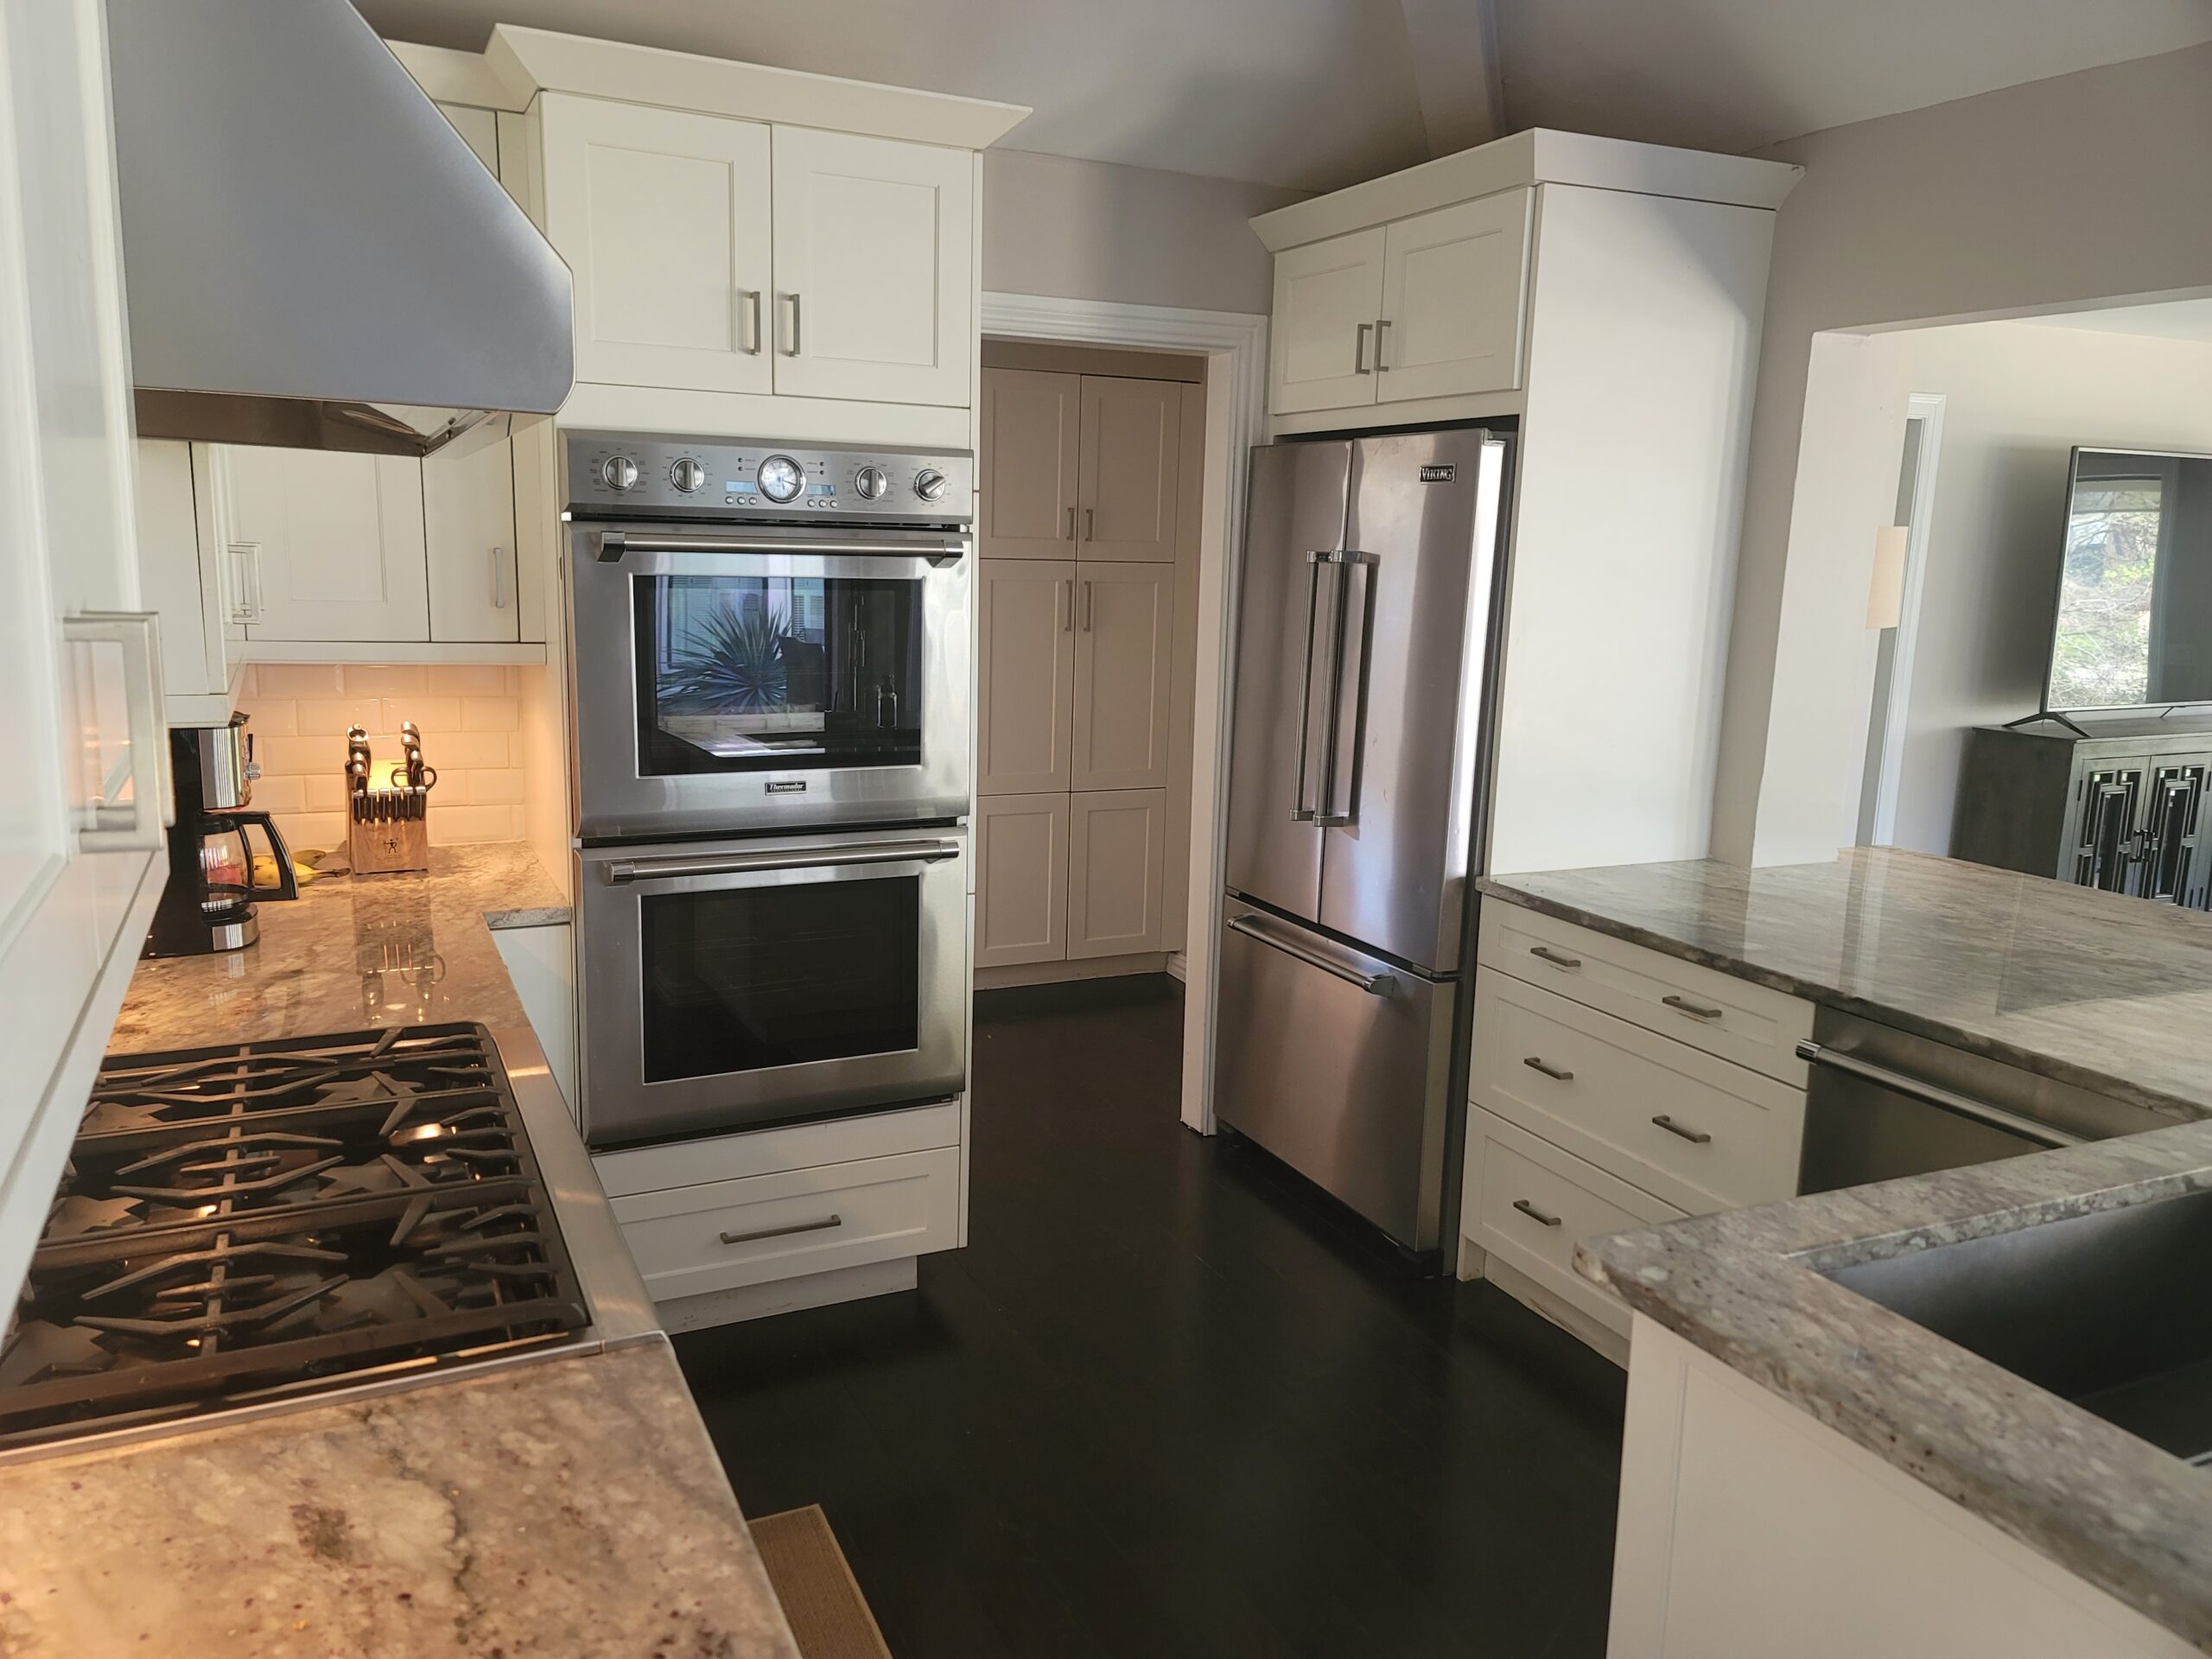 Turning Point Recovery Network Sober Living - Modern and Luxurious Kitchen